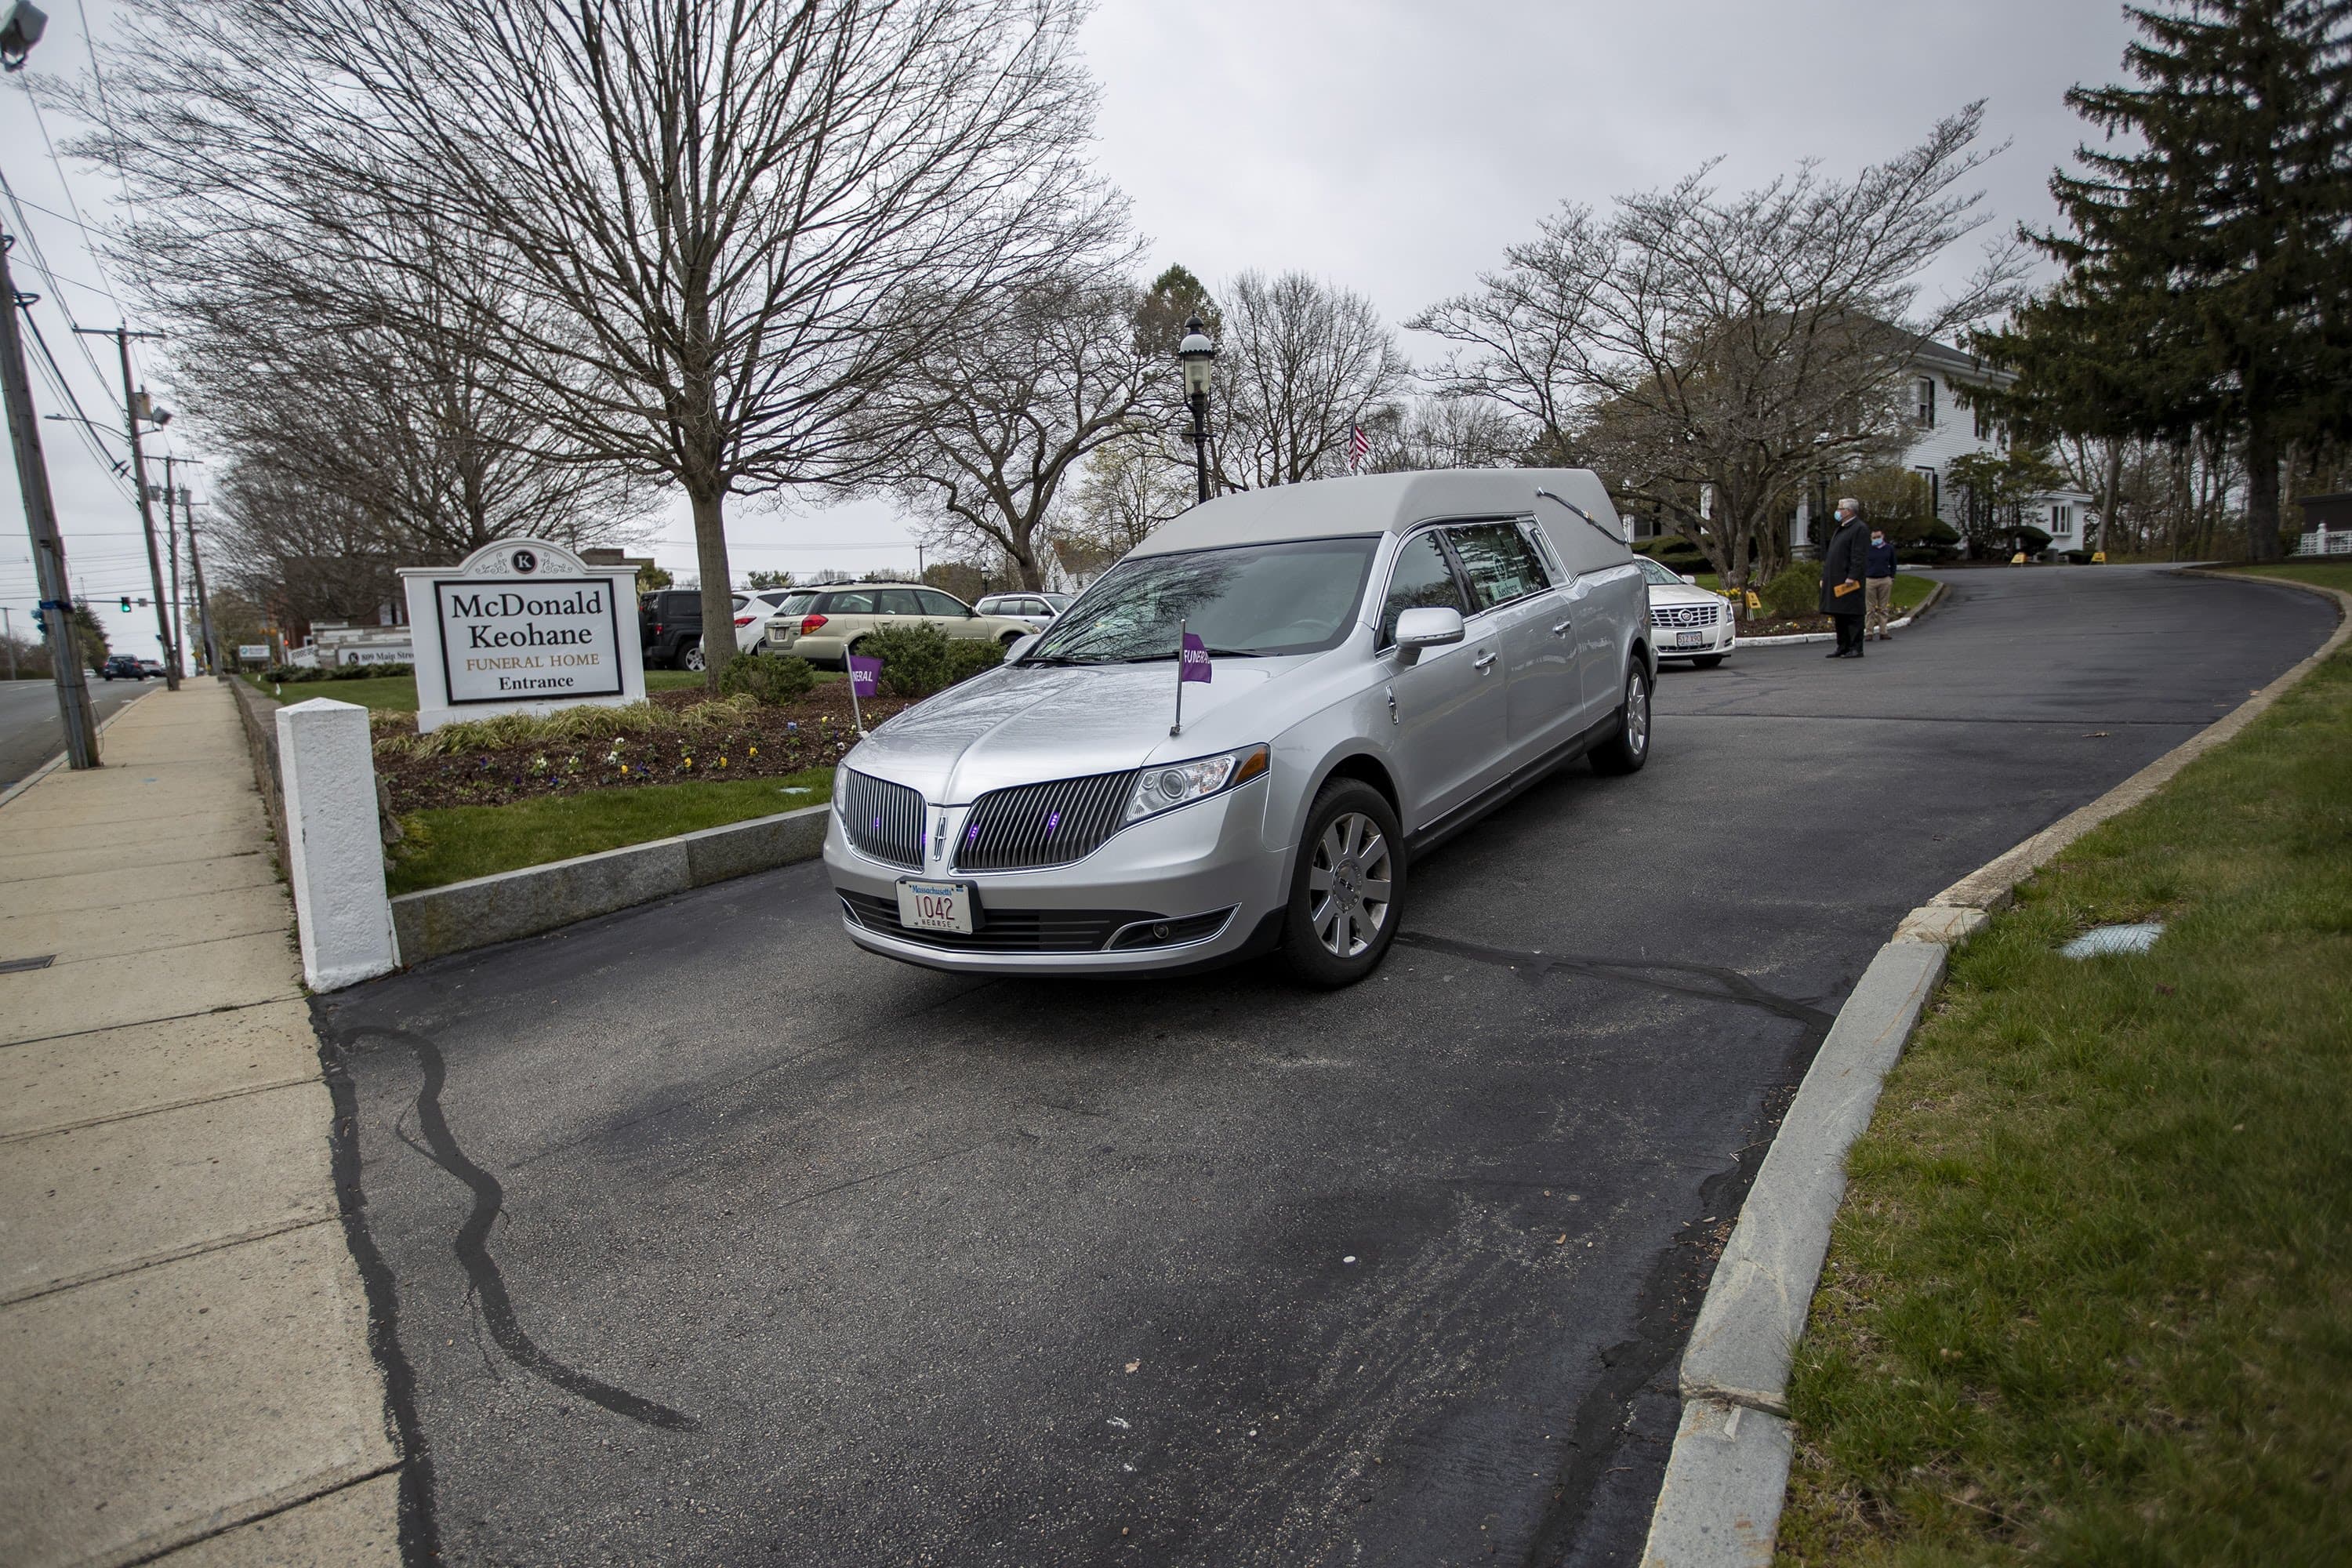 A hearse leaves the McDonald Keohane Funeral Home as it leads a procession to a nearby cemetery in Weymouth. (Jesse Costa/WBUR)